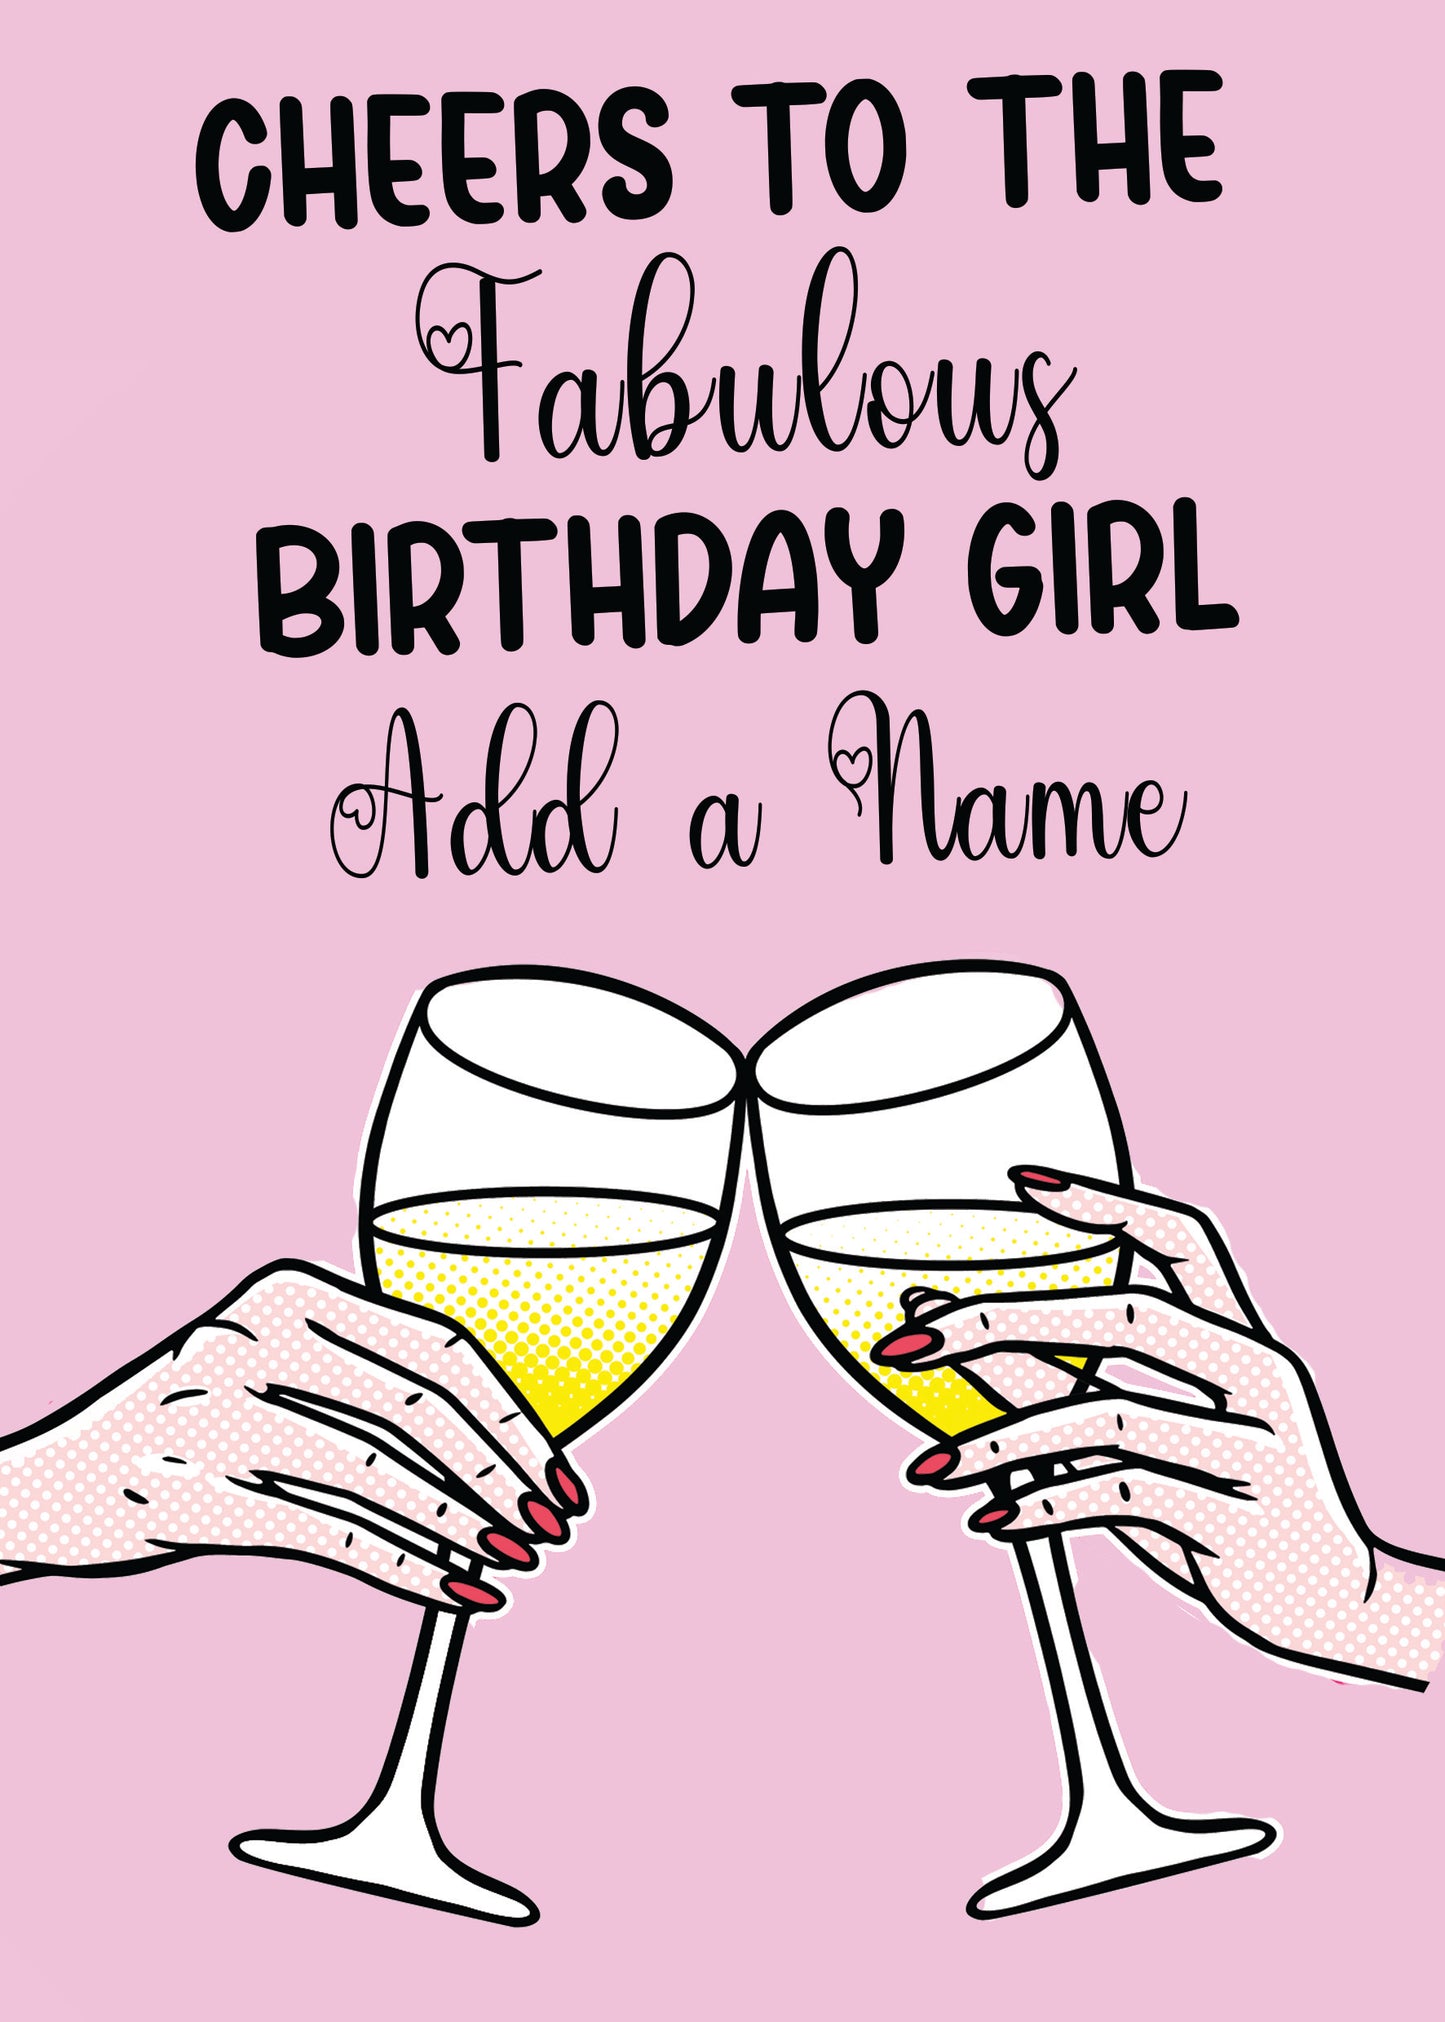 Cheers To The Birthday Girl Personalised Birthday Card